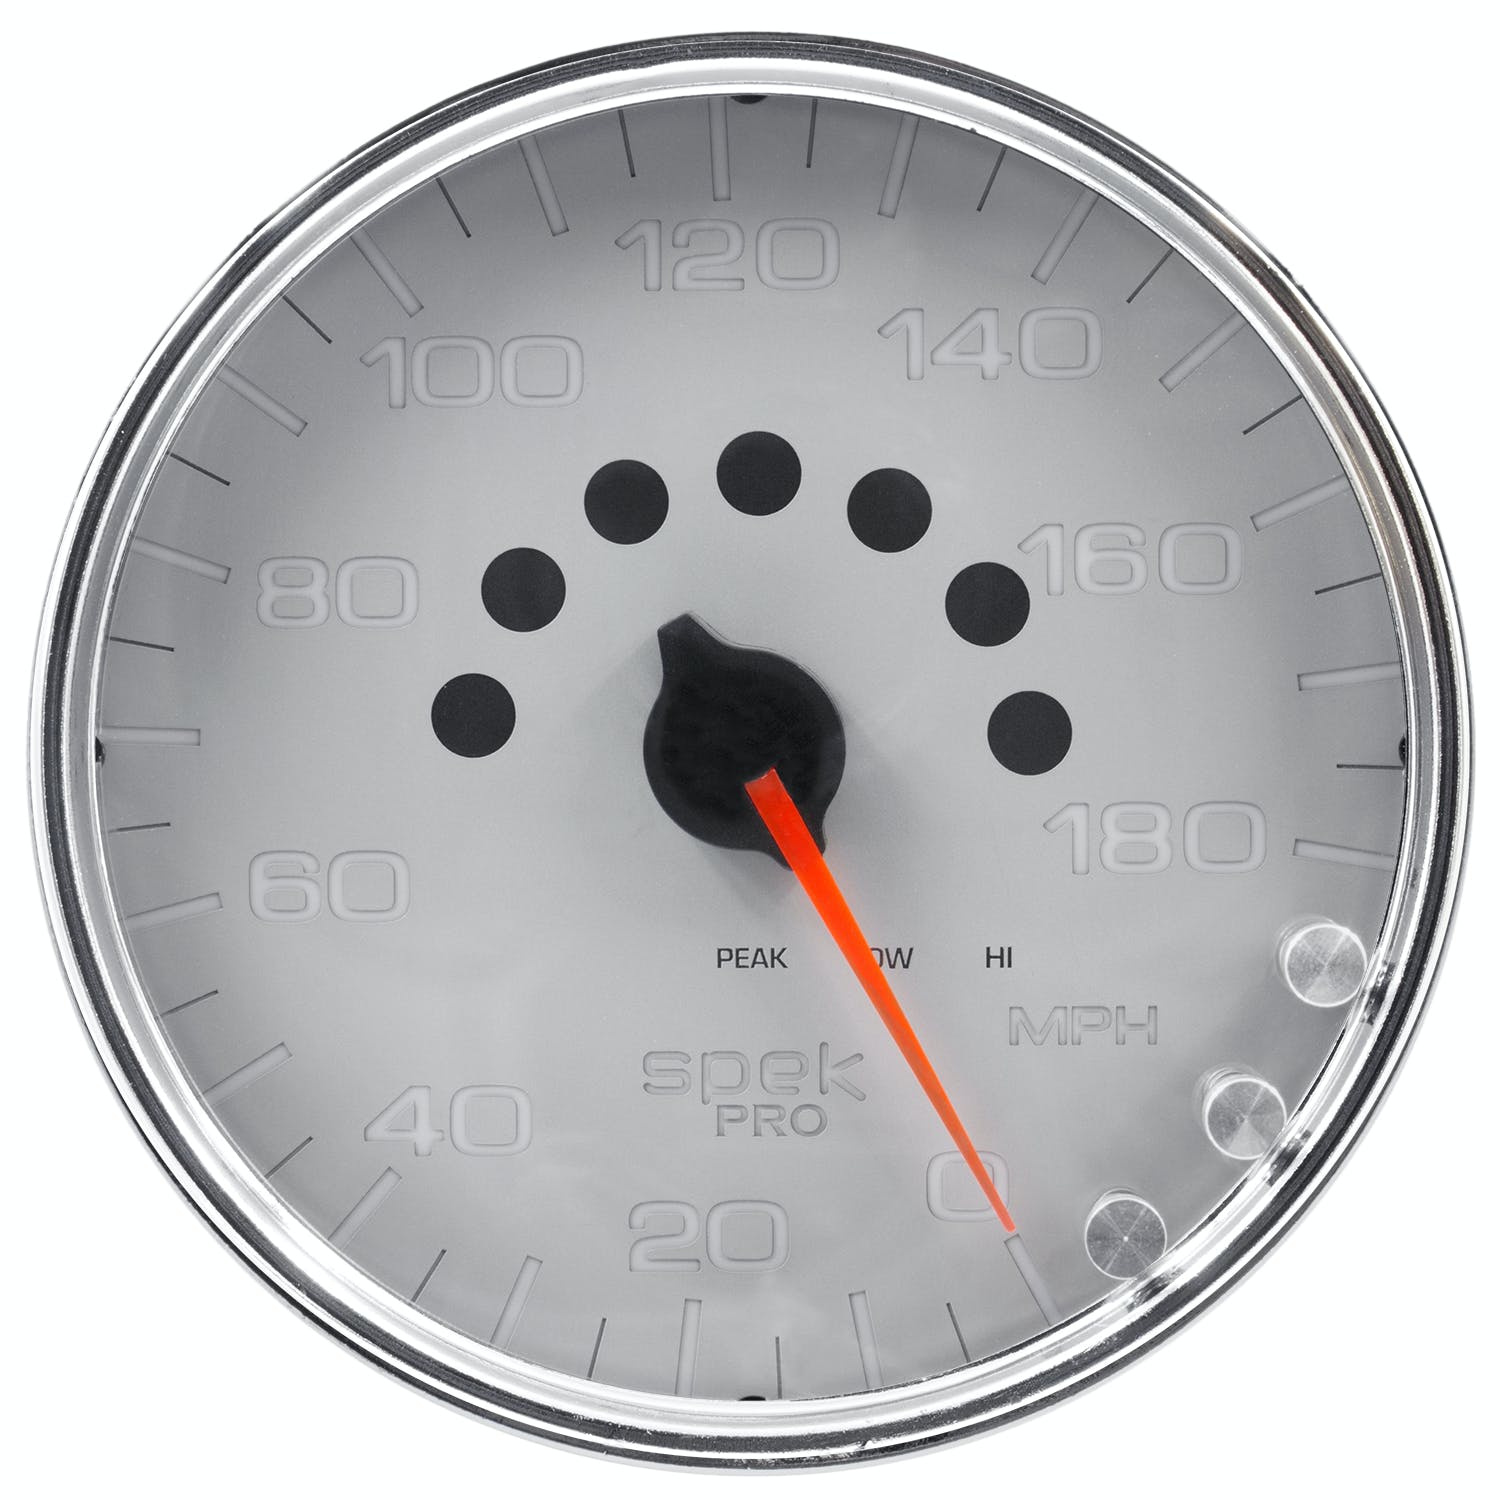 AutoMeter Products P23021 Spek Pro Speedometer Gauge, Electric Programmable Silver/Chrome 5, 180 MPH